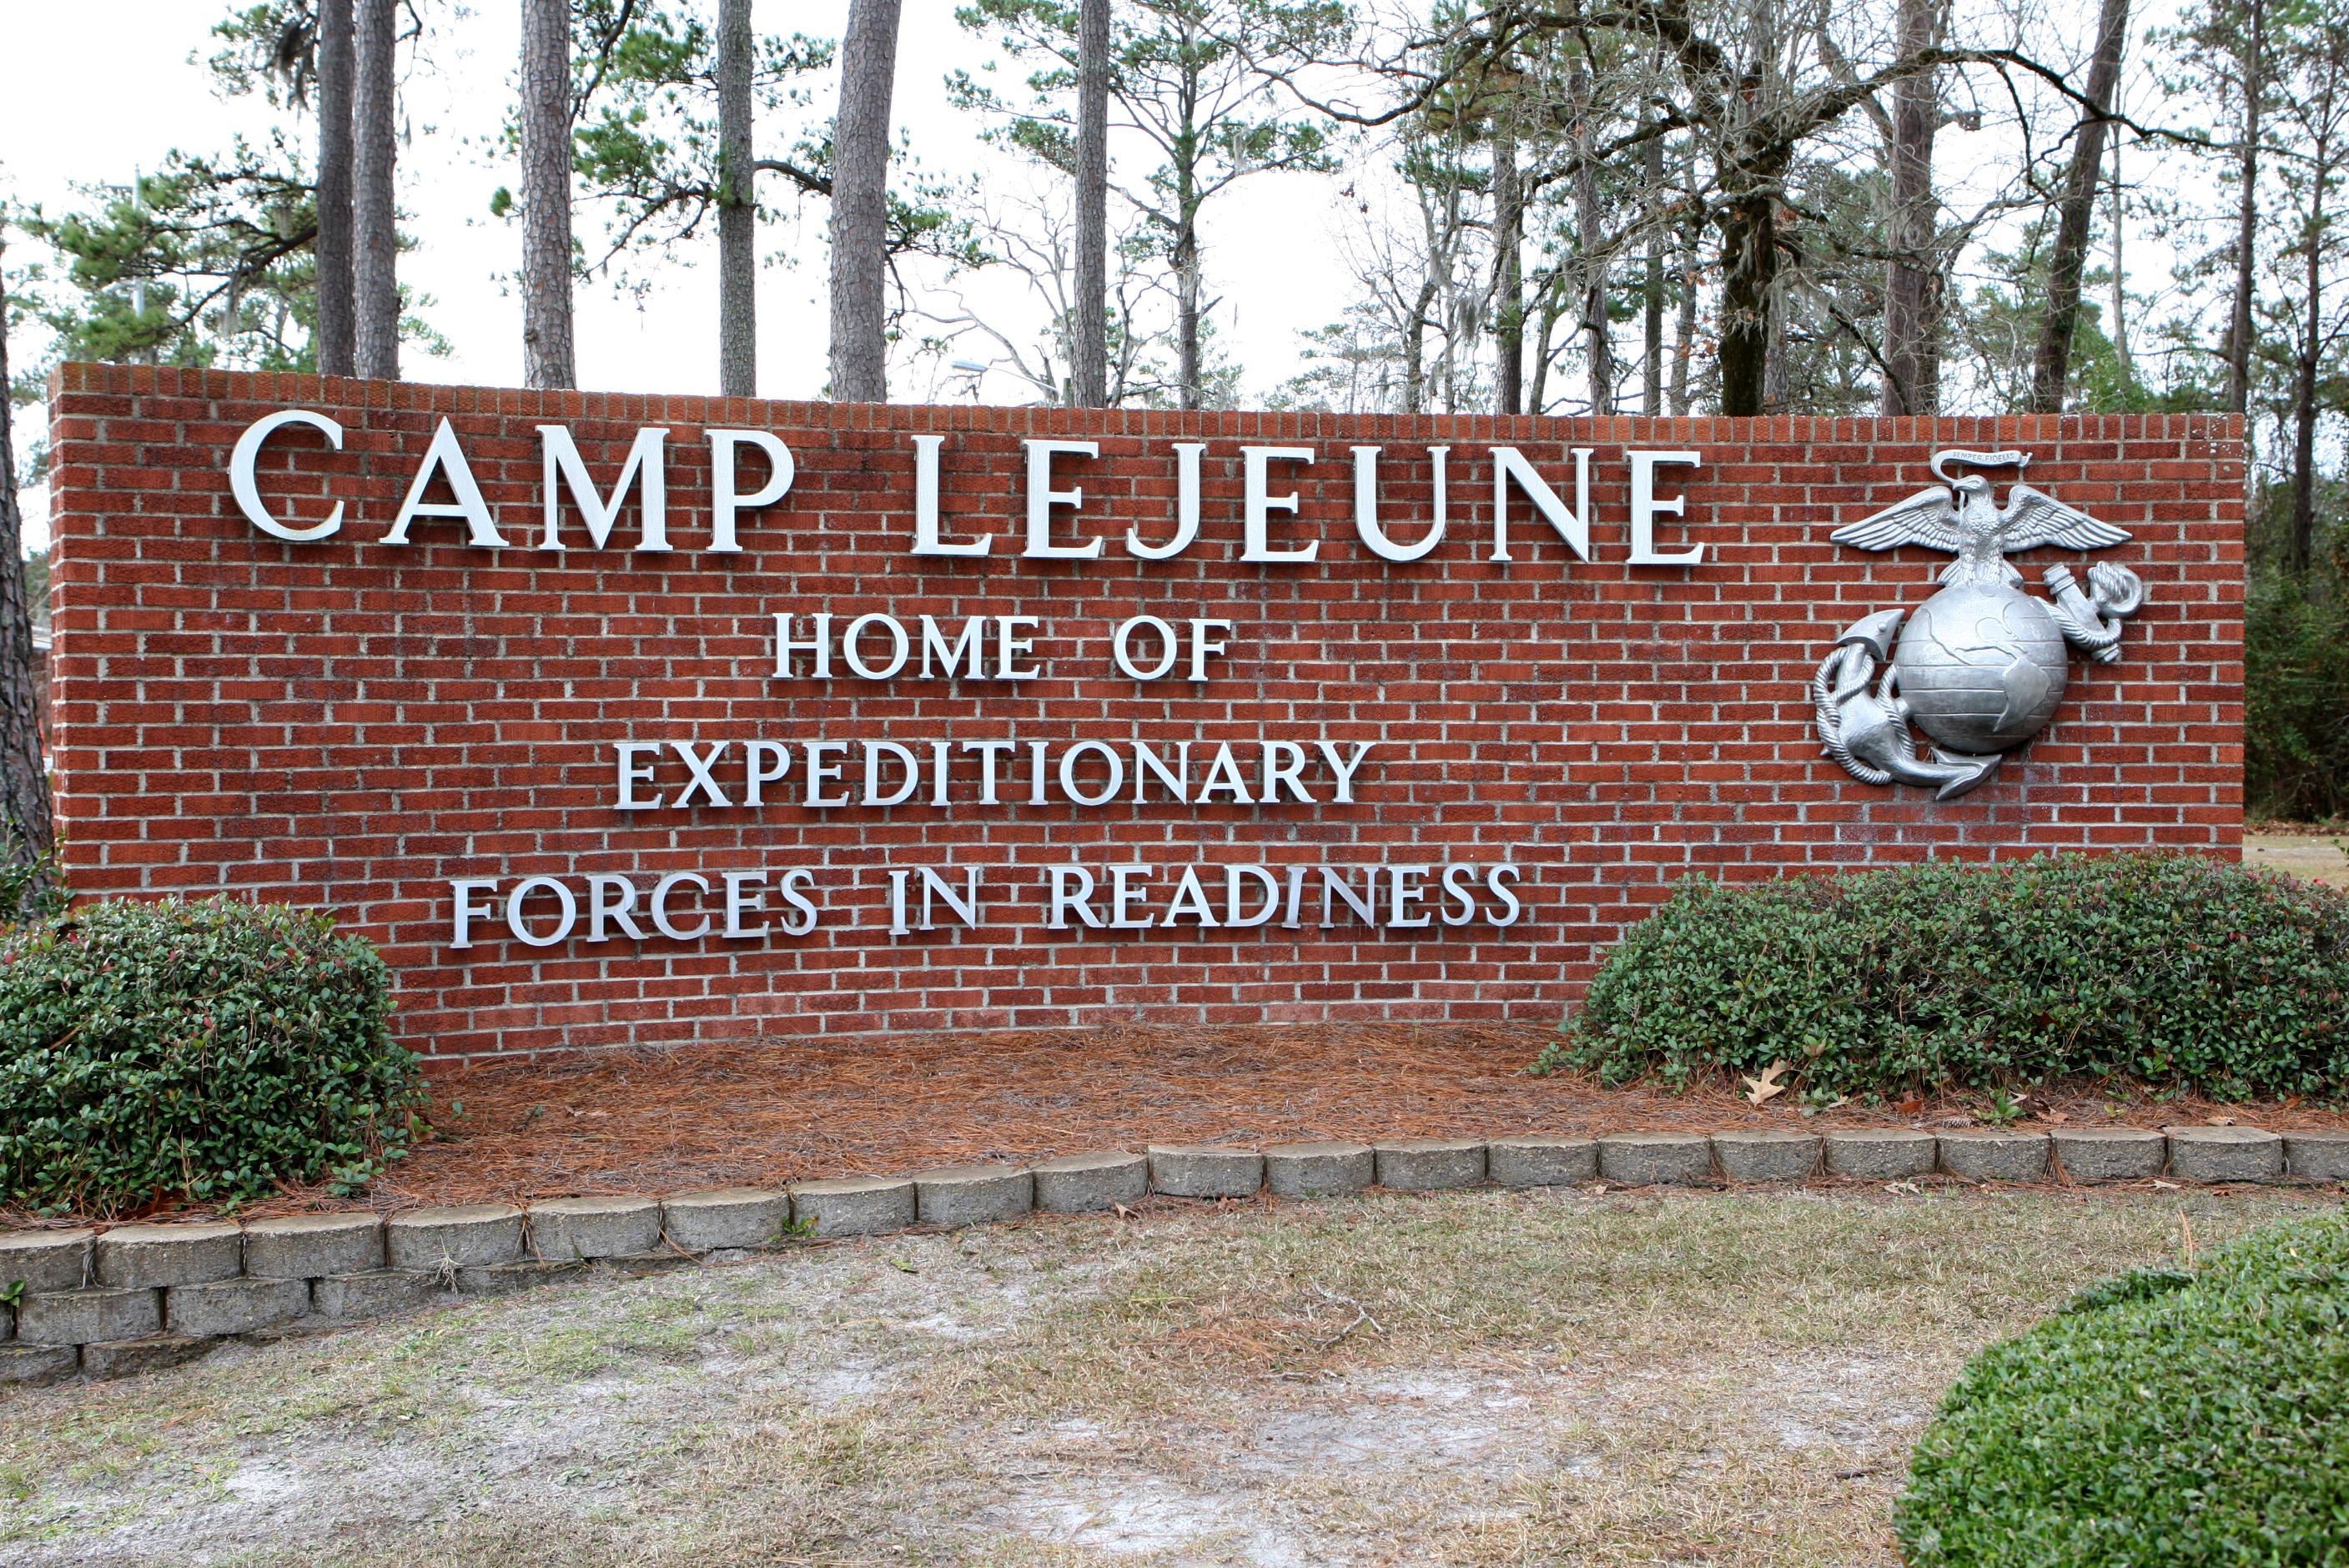 A welcome sign stands outside of the Holcomb Gate on Marine Corps Base (MCB) Camp Lejeune, North Carolina, Jan. 8, 2008. MCB Camp Lejeune has been noted as the Home of the Expeditionary Forces in Readiness; directly supporting the II Marine Expeditionary Force. (Photo courtesy of U.S. Marine Corps)